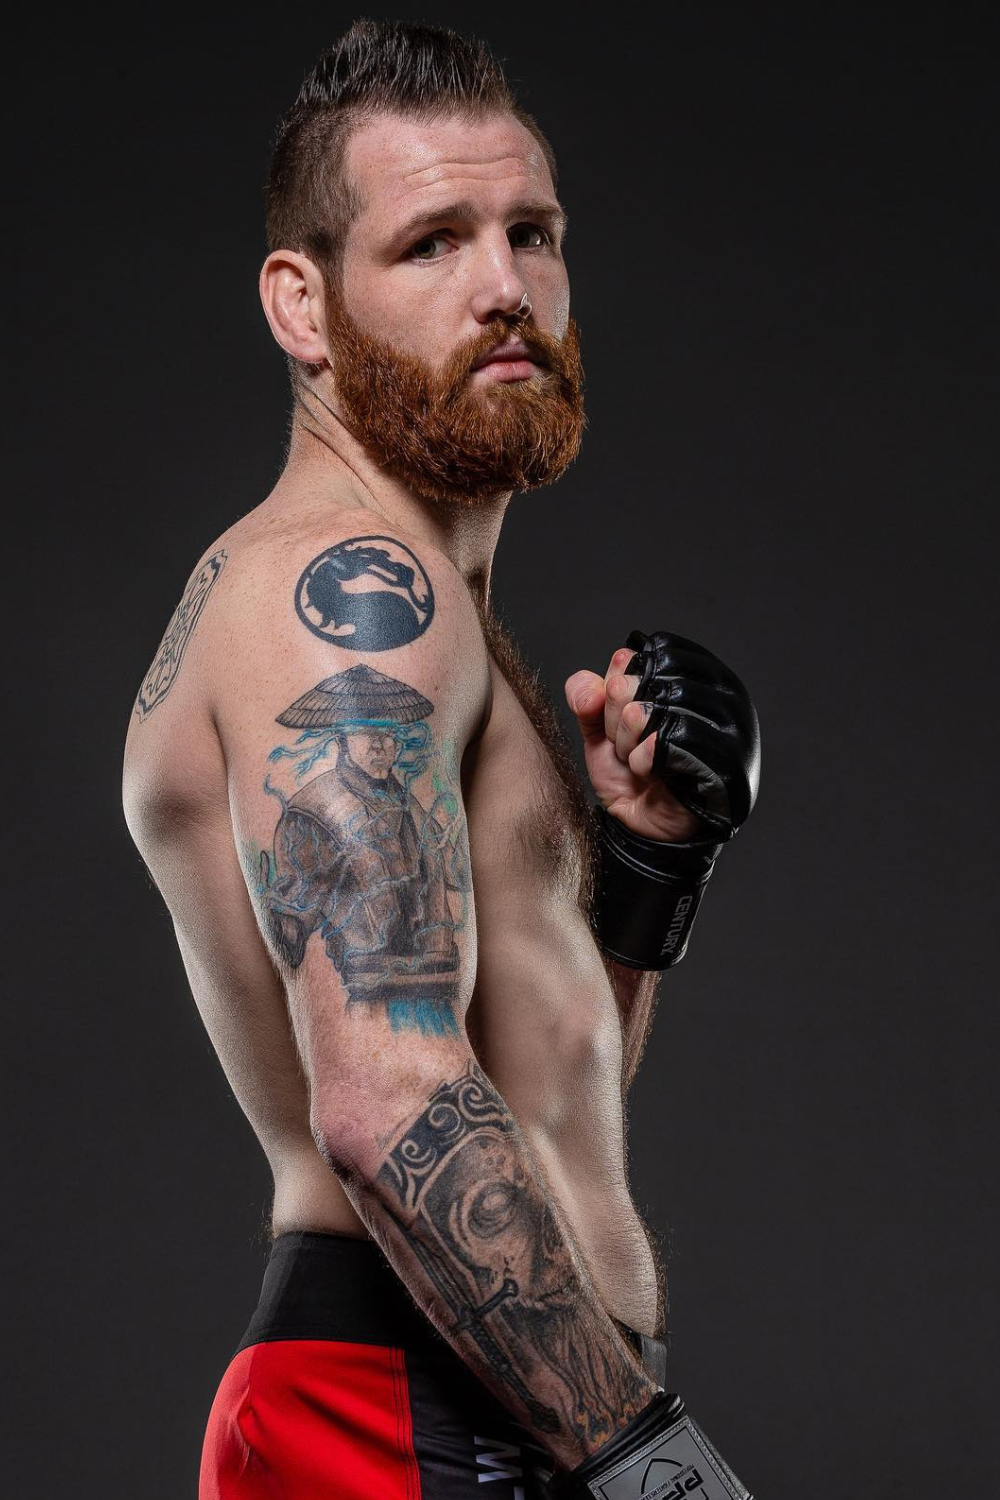 The American Professional Mixed Martial Artist, Clay Collard